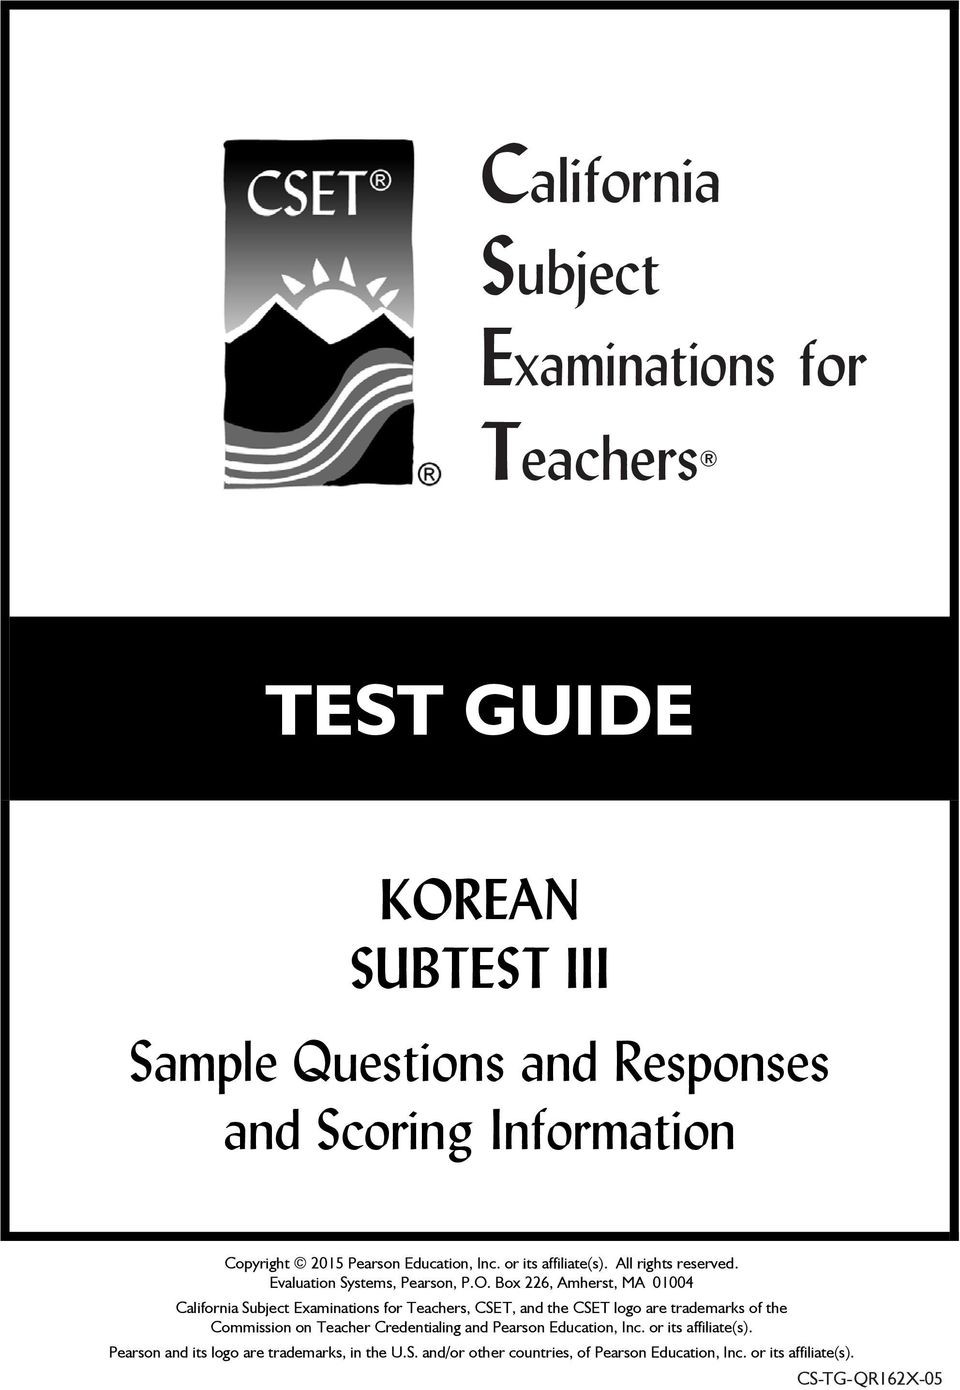 Box 226, Amherst, MA 01004 California Subject Examinations for Teachers, CSET, and the CSET logo are trademarks of the Commission on Teacher